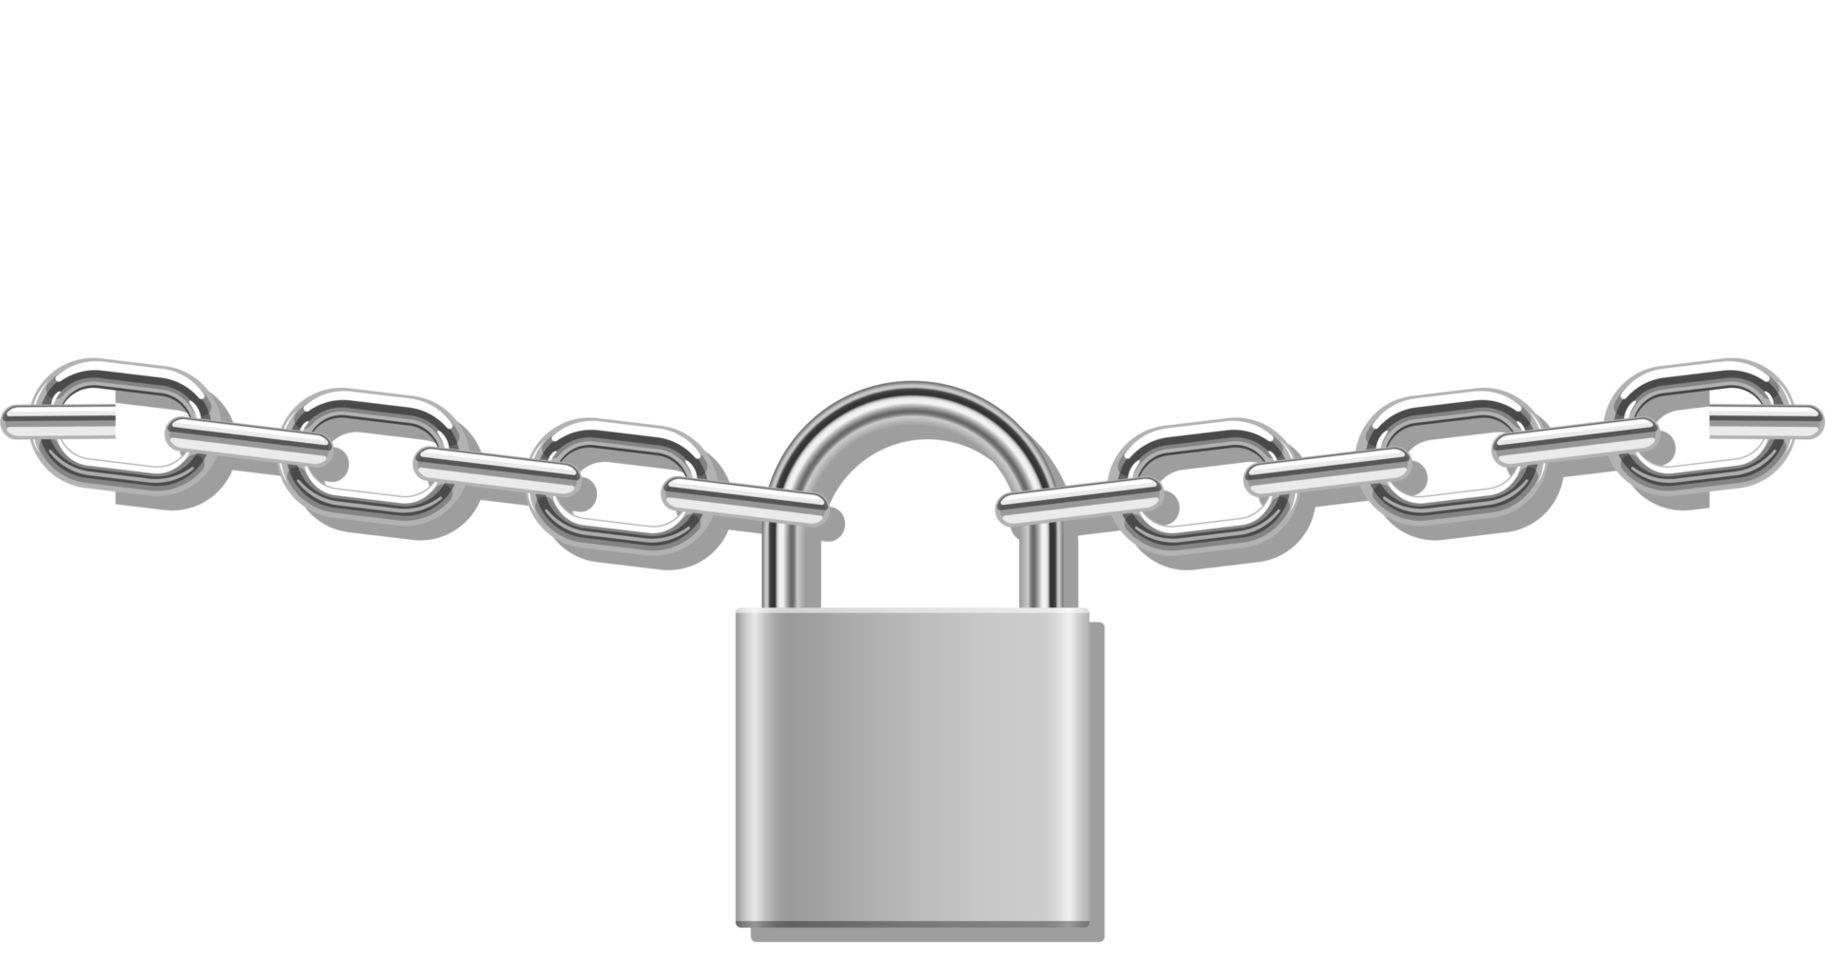 Credit card in chain locked with padlock clipart design illustration png